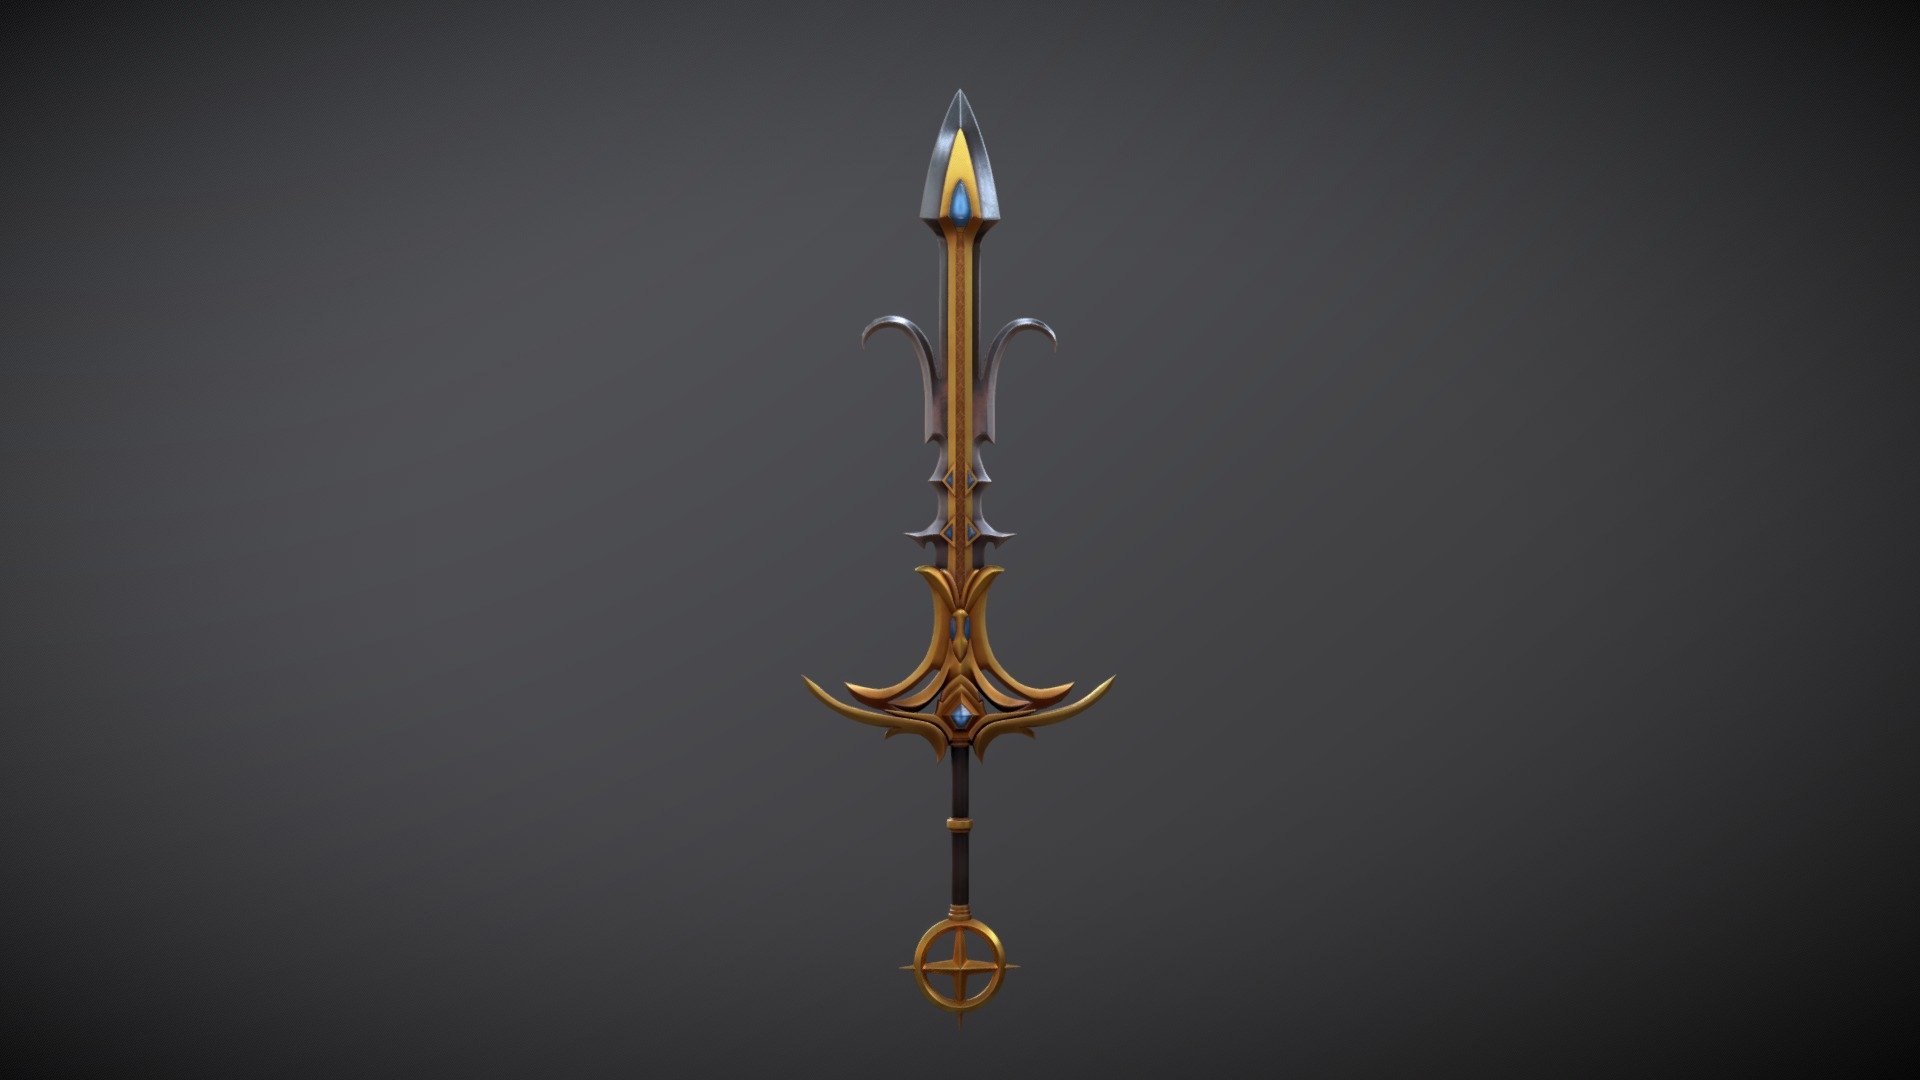 Saradomin Gowdsord from Runescape. Still working on finishing all 4. Modeled in Blender and textures in Substance Painter - Saradomin Godsword (Runescape) - 3D model by seandekoda 3d model